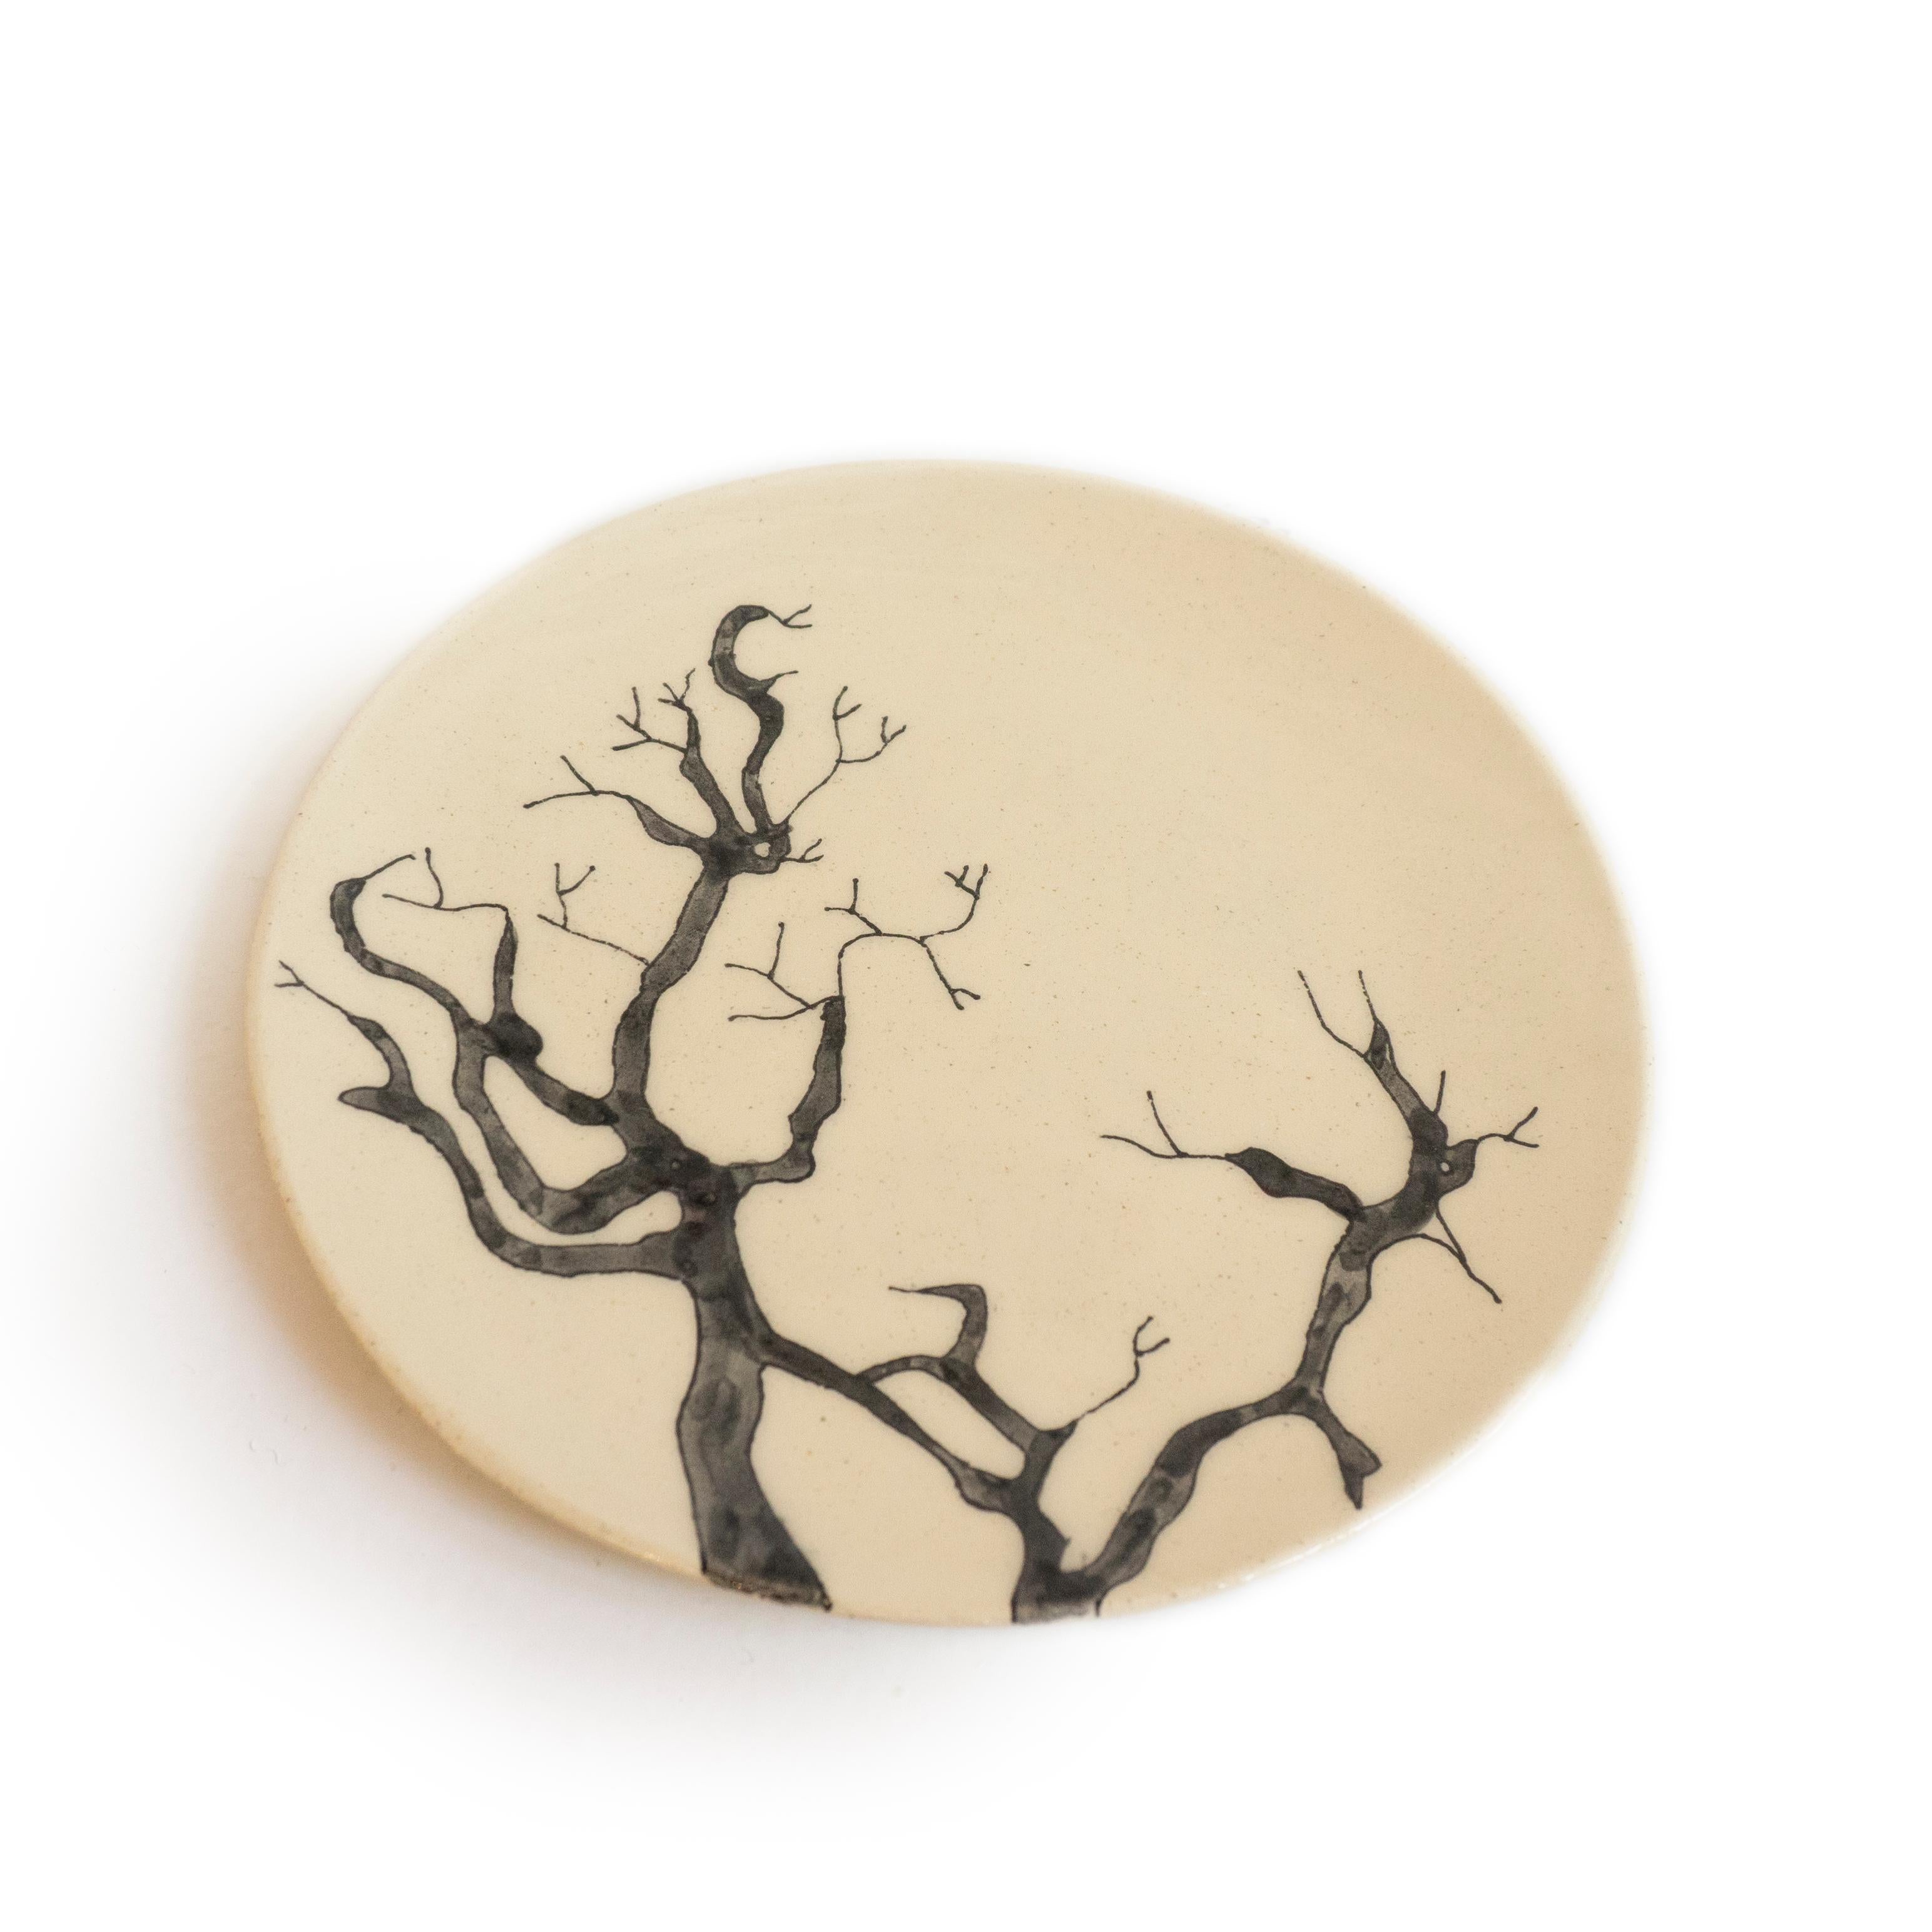 These handcrafted ceramic plates from Paris are completely handmade. From the hand beating of the clay to the drawn illustration each plate is meticulously crafted. These plates are made from natural clay resulting in slightly different hues from